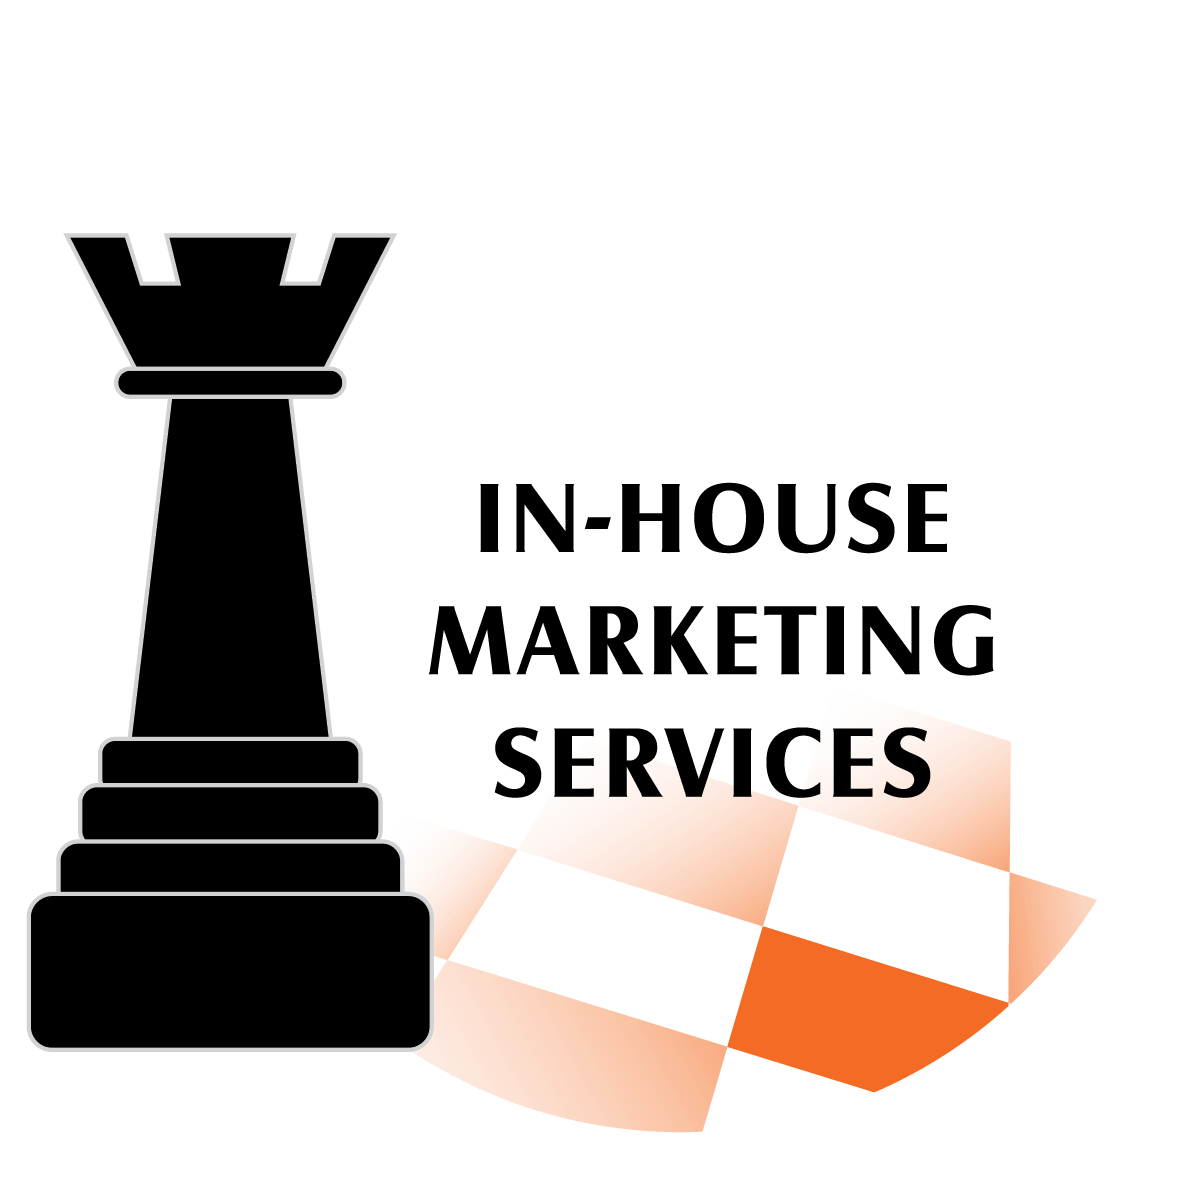 queen chess piece Small Business training